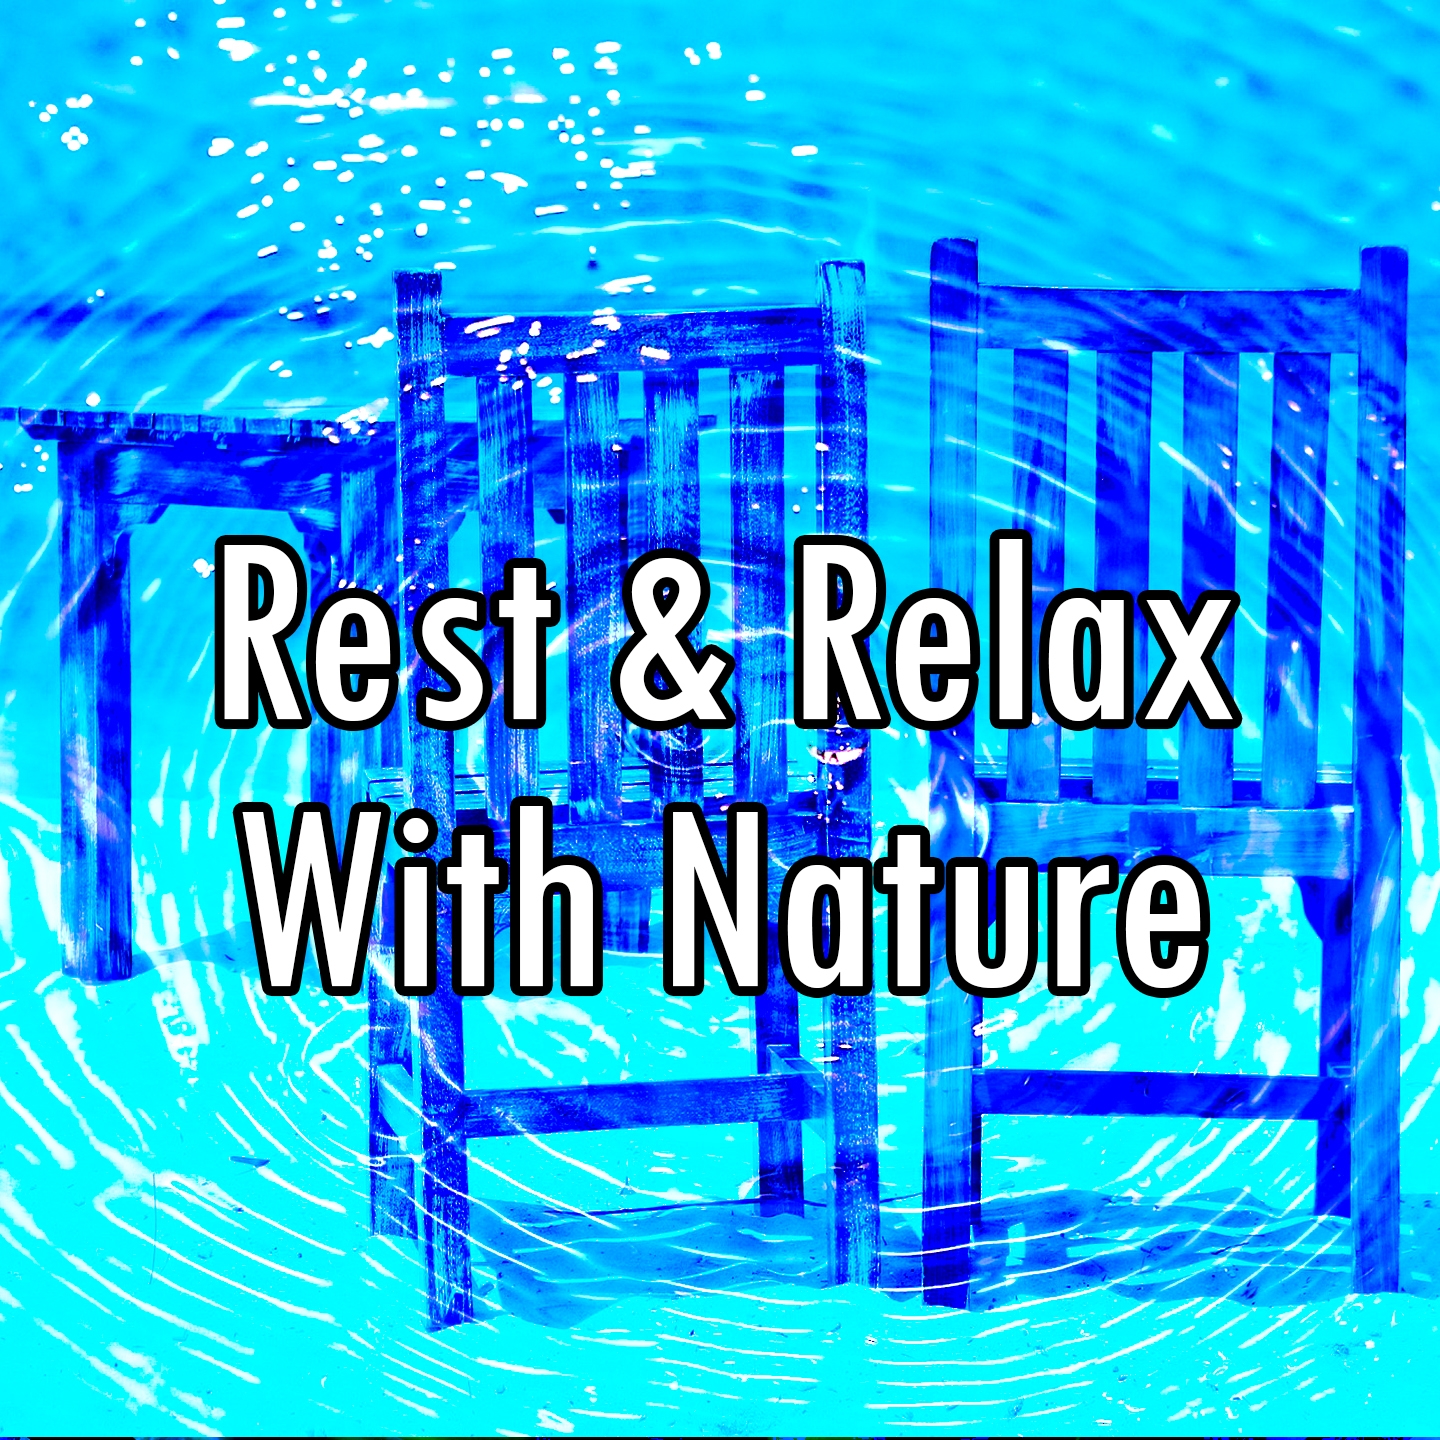 Rest & Relax With Nature